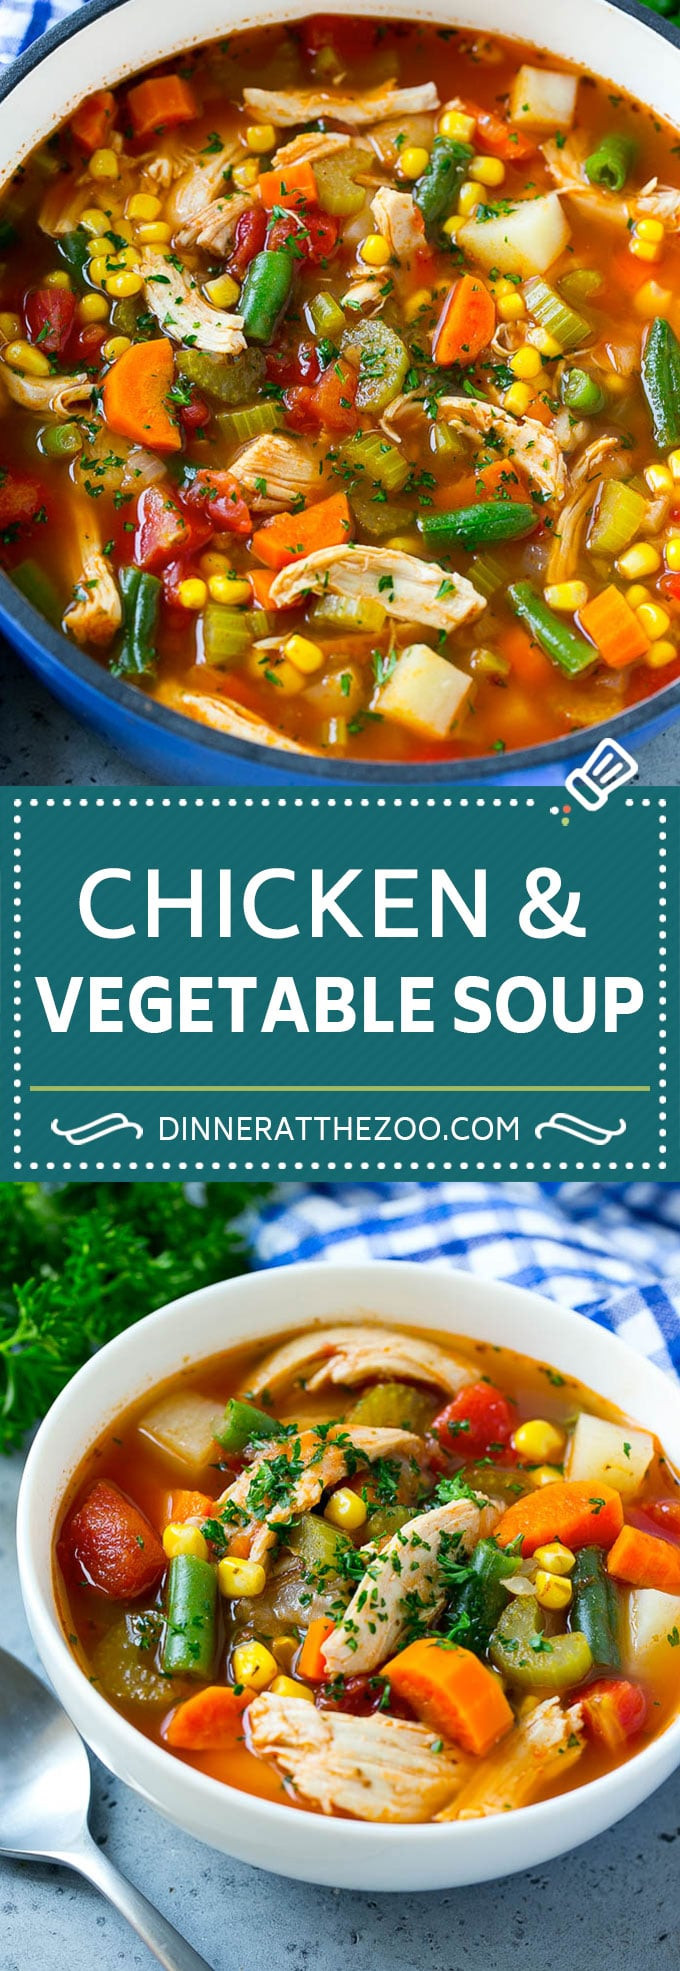 Recipe For Chicken Vegetable Soup
 Chicken Ve able Soup Dinner at the Zoo